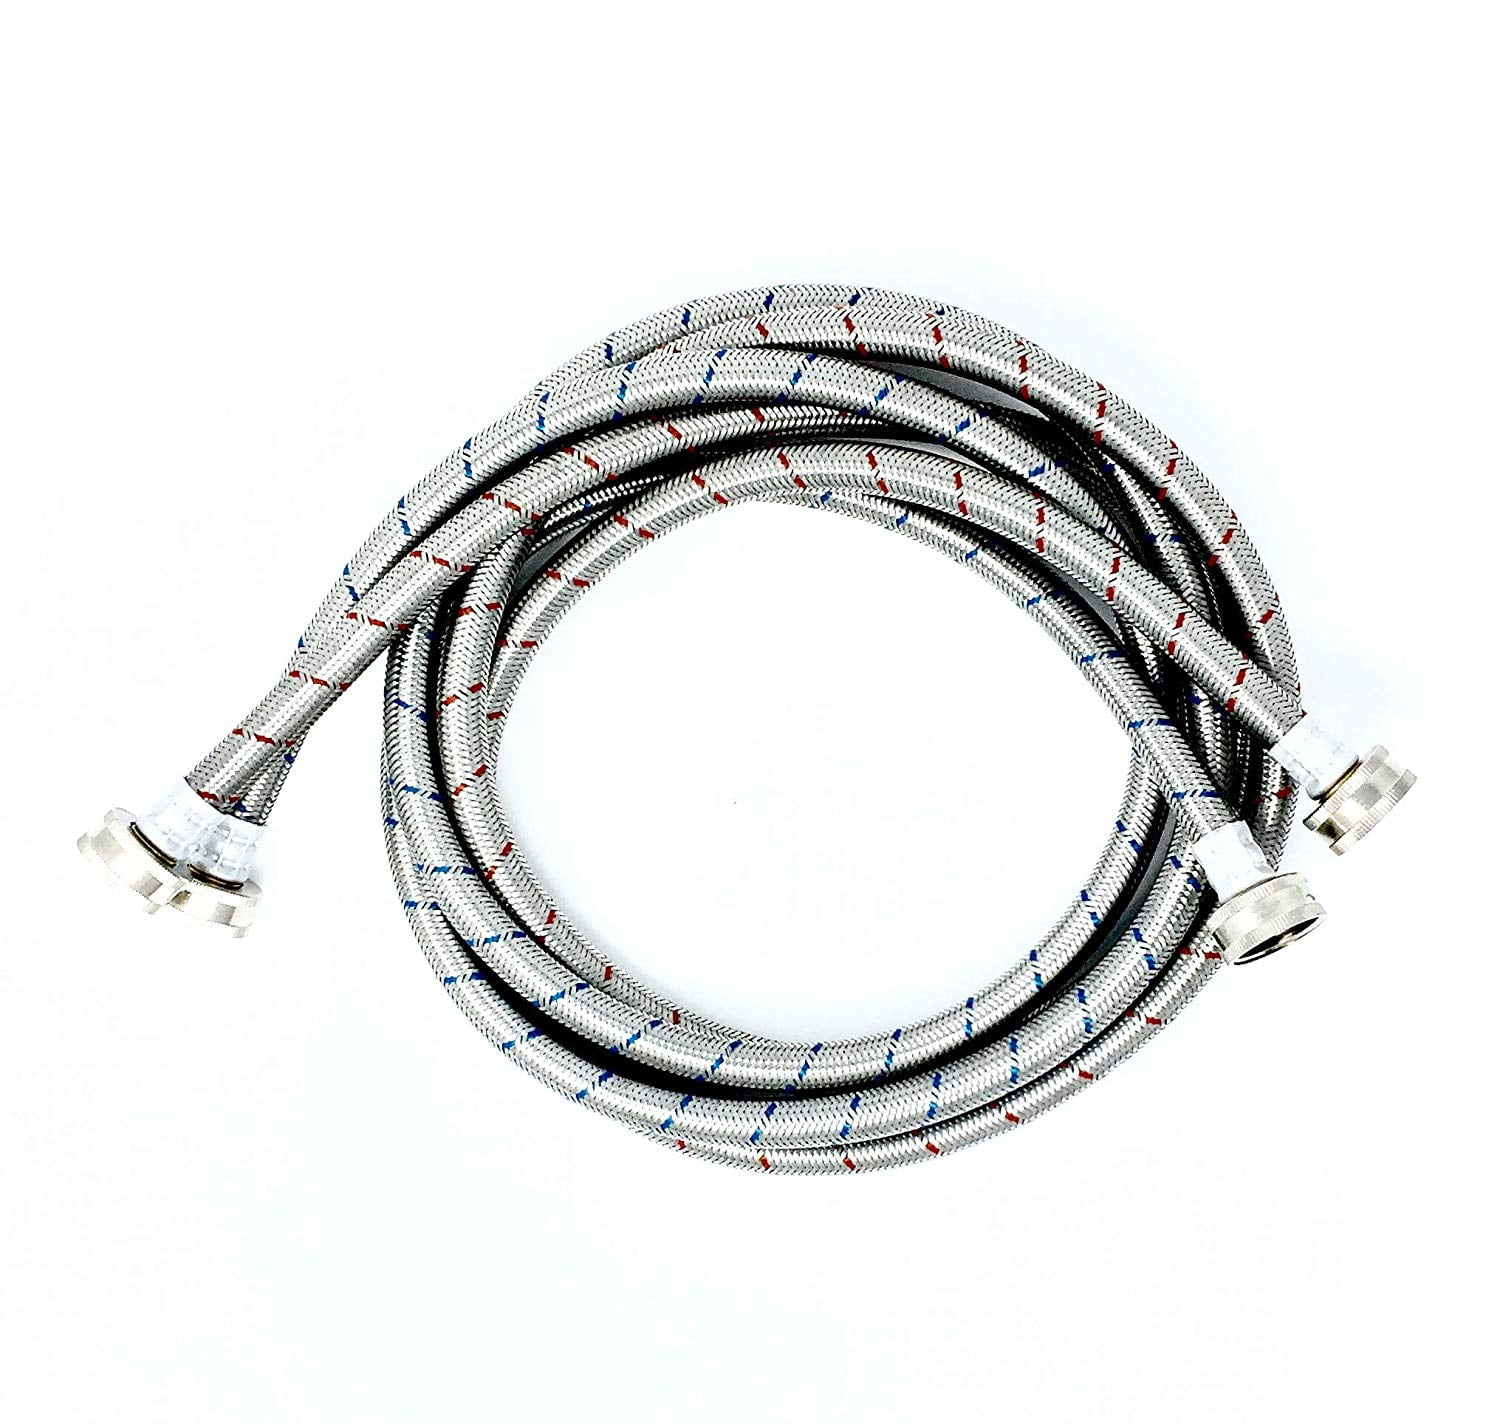 NEW Washing machine hoses burst proof 6 foot stainless steel braided 2 pack 